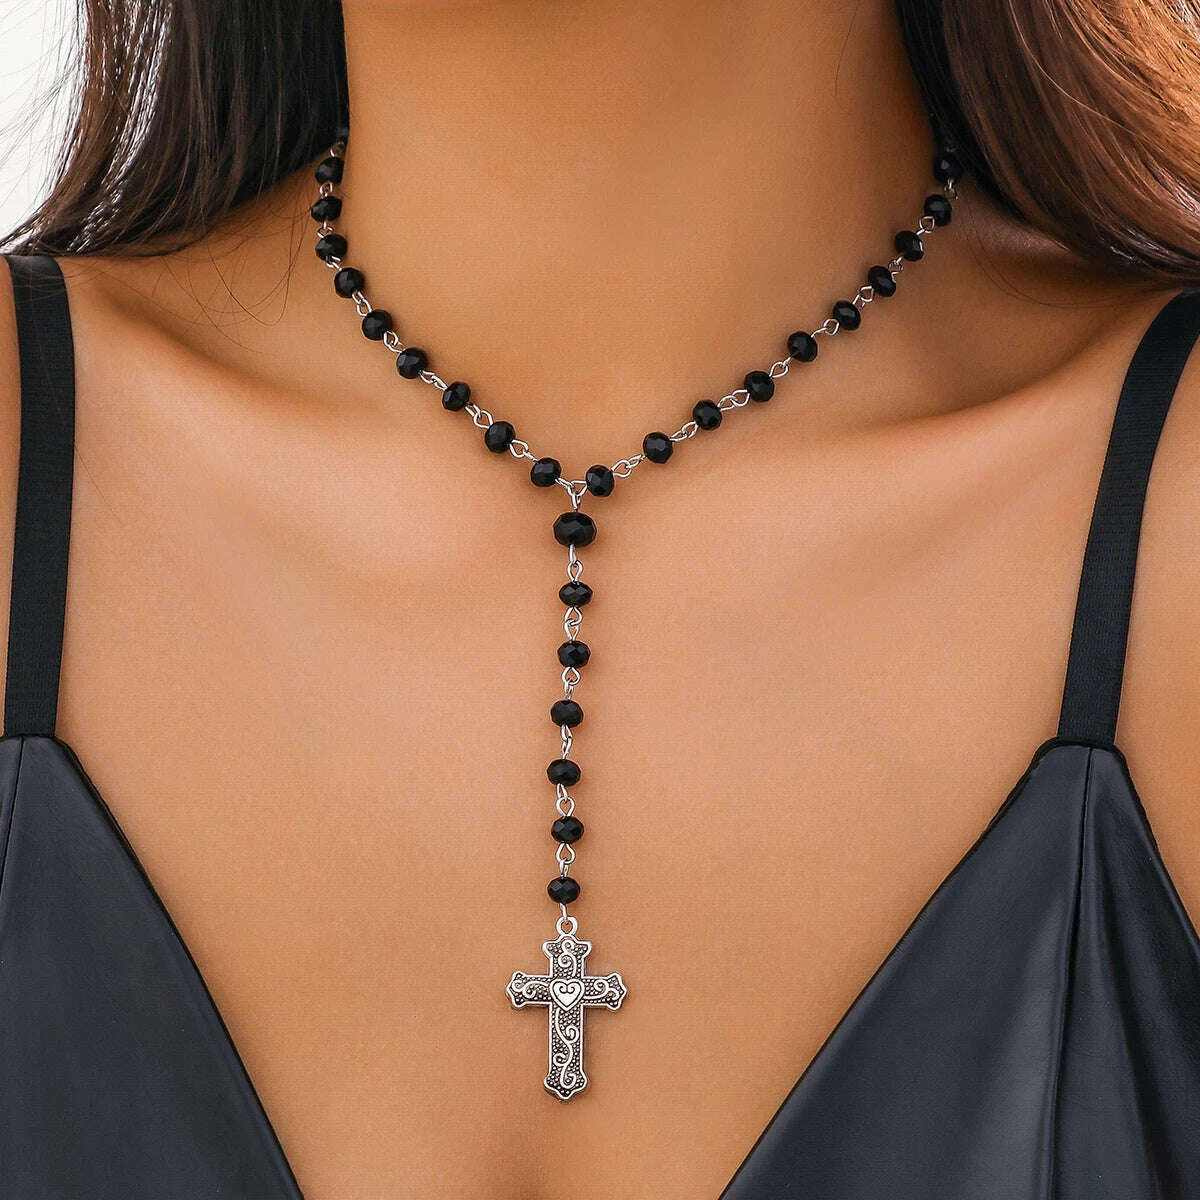 KIMLUD, Ingemark Goth Cross Jesus Pendant Tassel Choker Necklace for Women Trendy Vintage Crystal Beads Chain Y2K Jewelry Accessories, Color 3, KIMLUD Womens Clothes